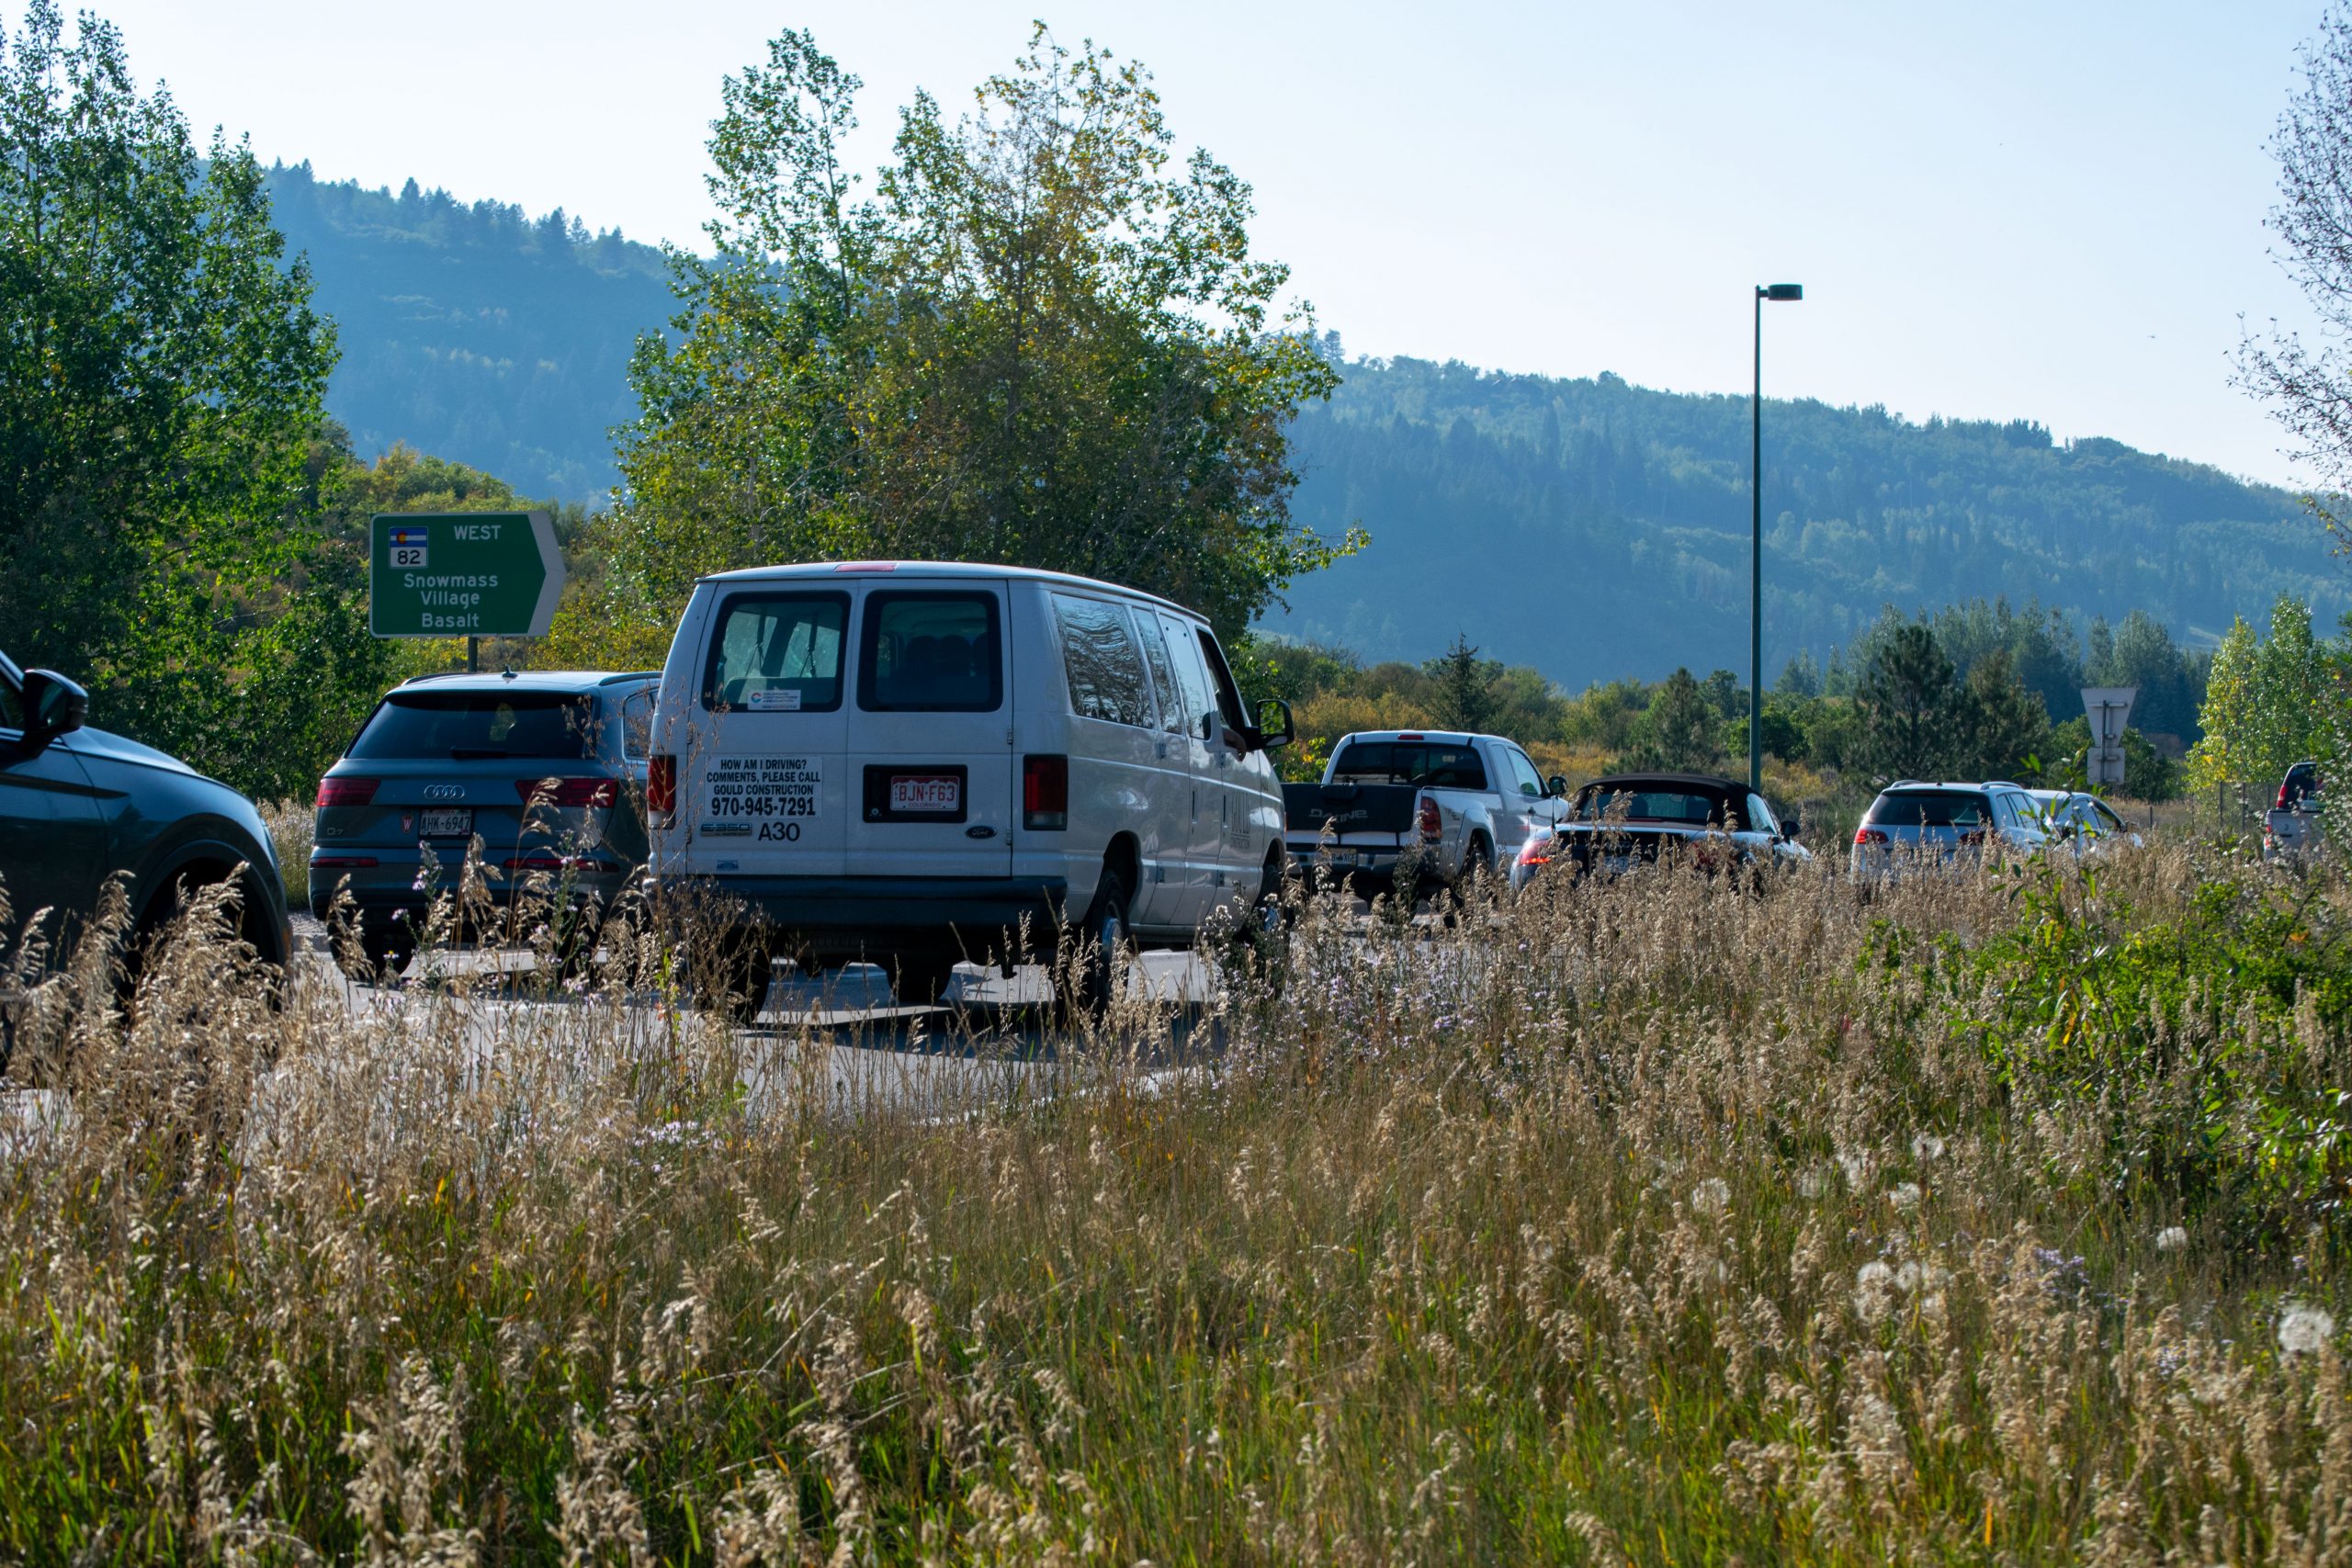 Afternoon rush-hour traffic at Aspen’s roundabout as cars leave town, driving downvalley on Highway 82.